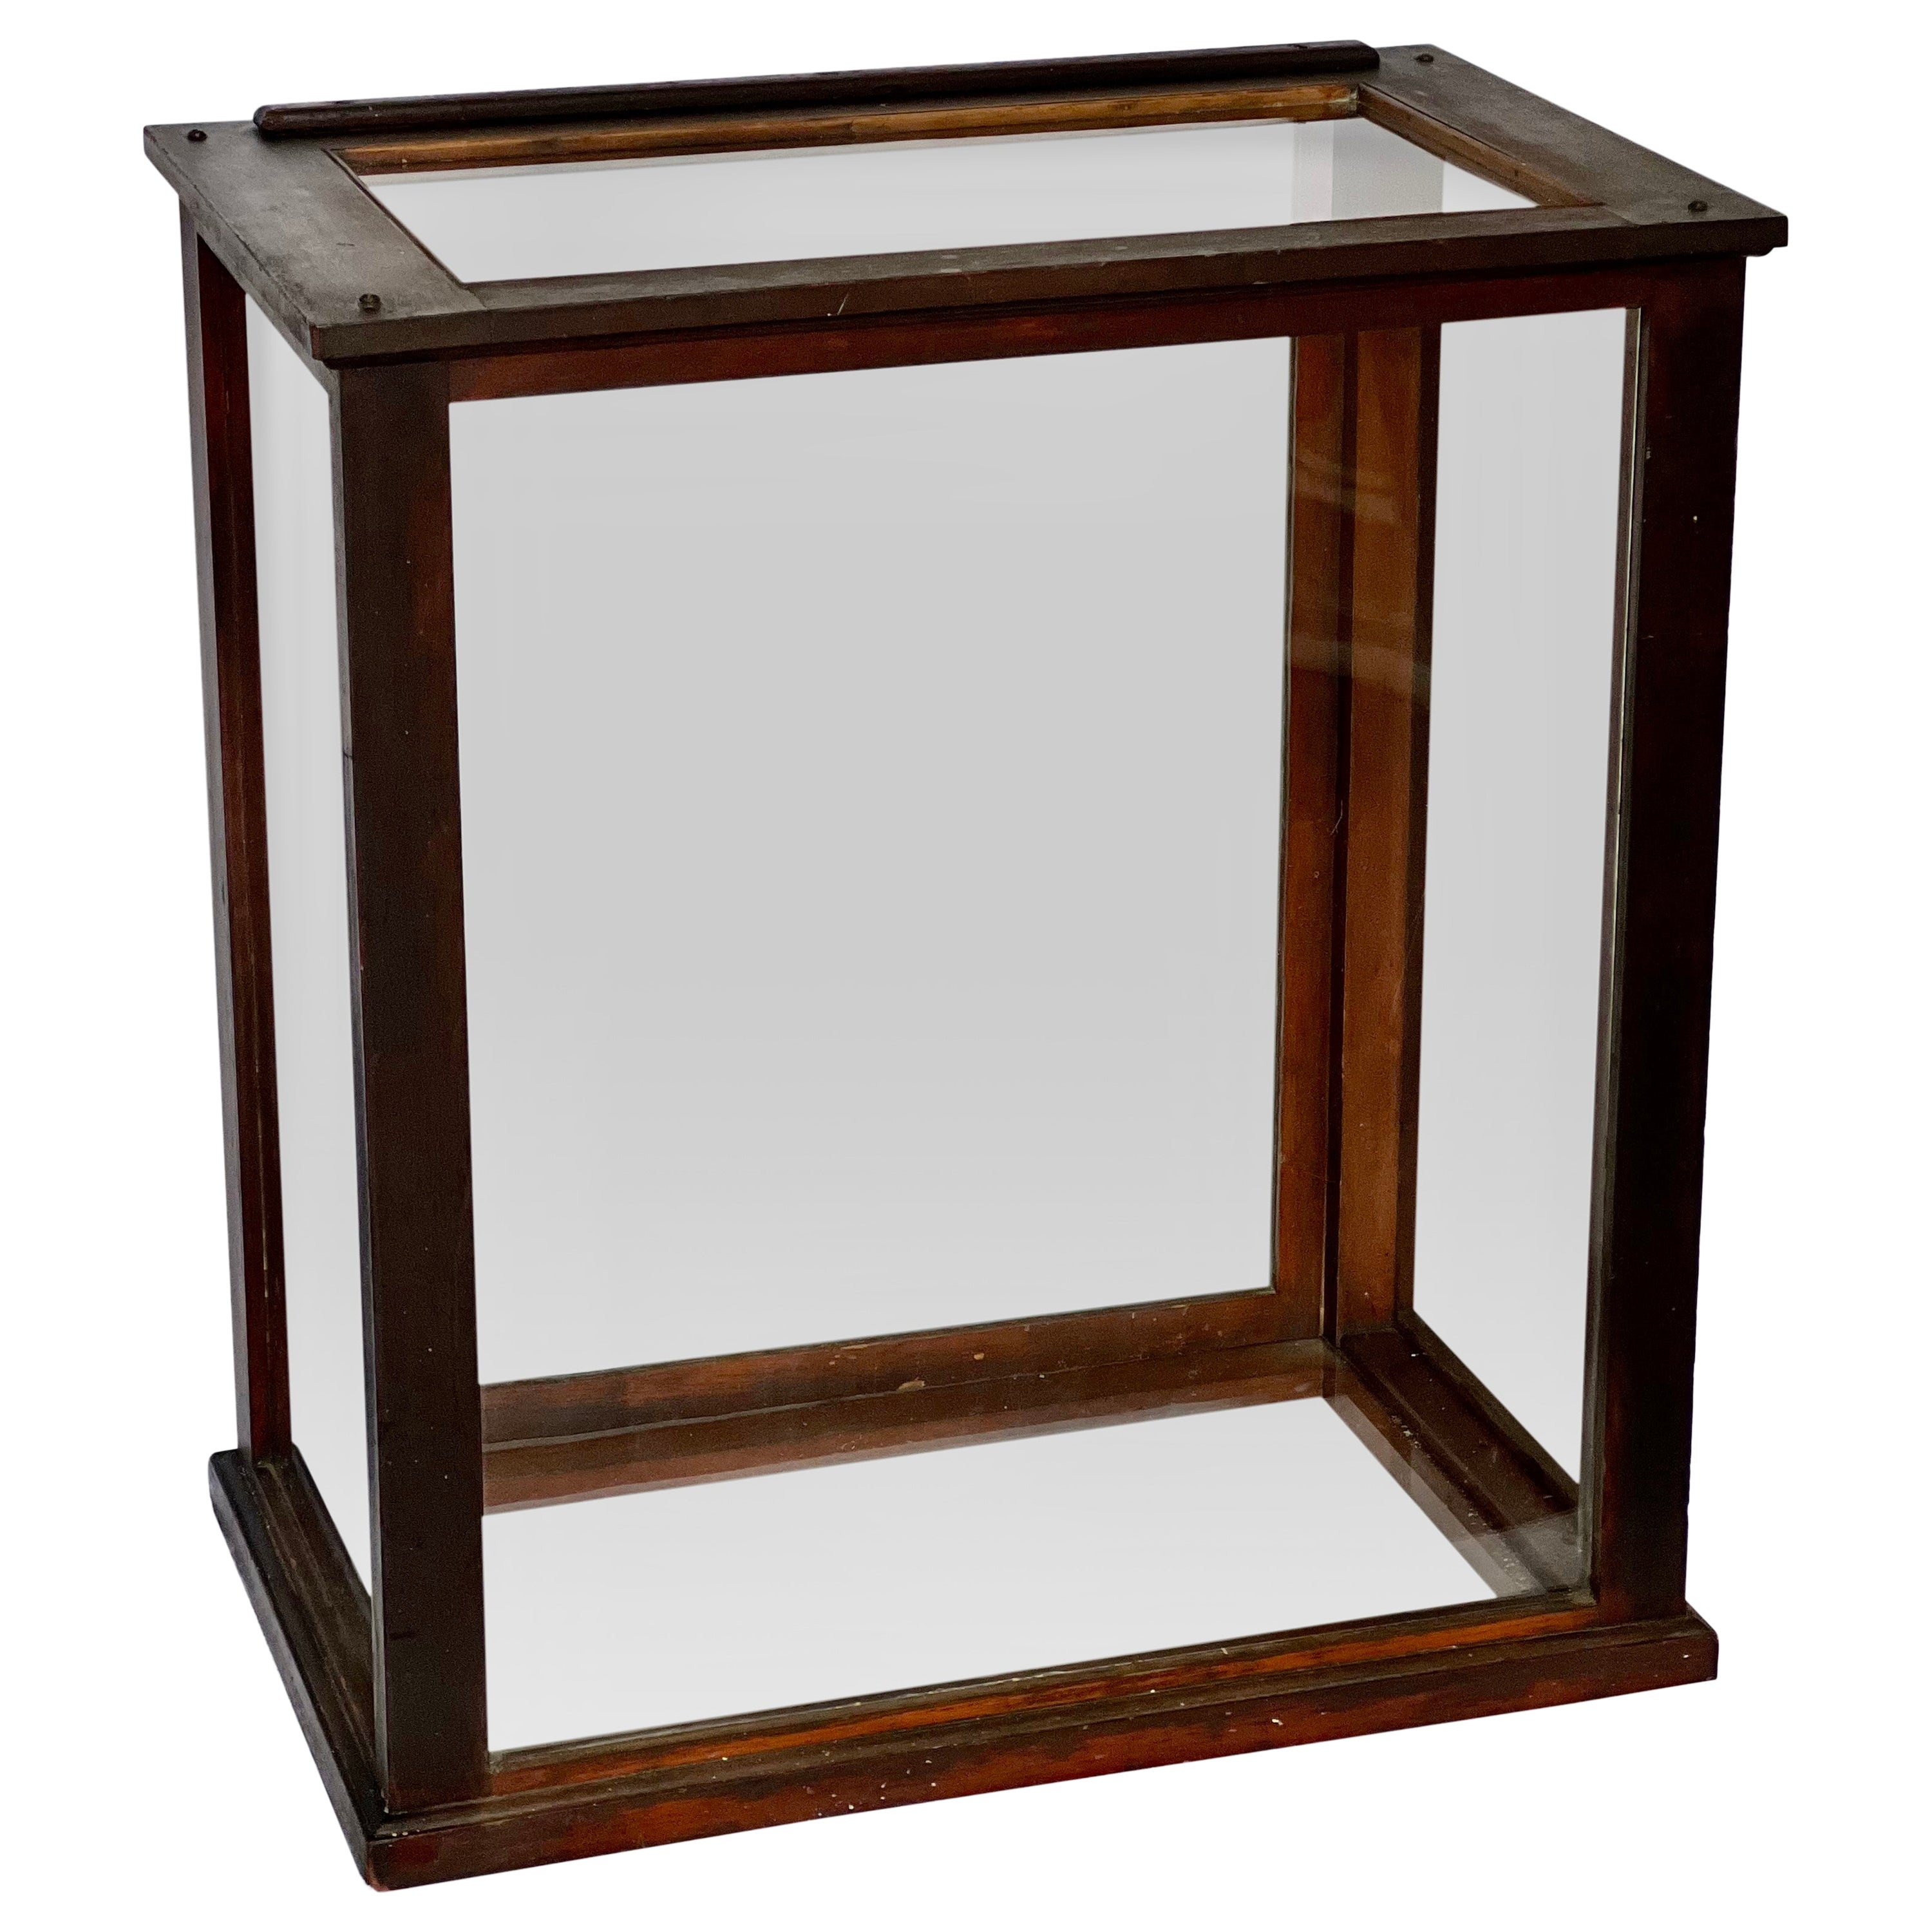 Antique English Mahogany and Glass Countertop Shop Display Case For Sale